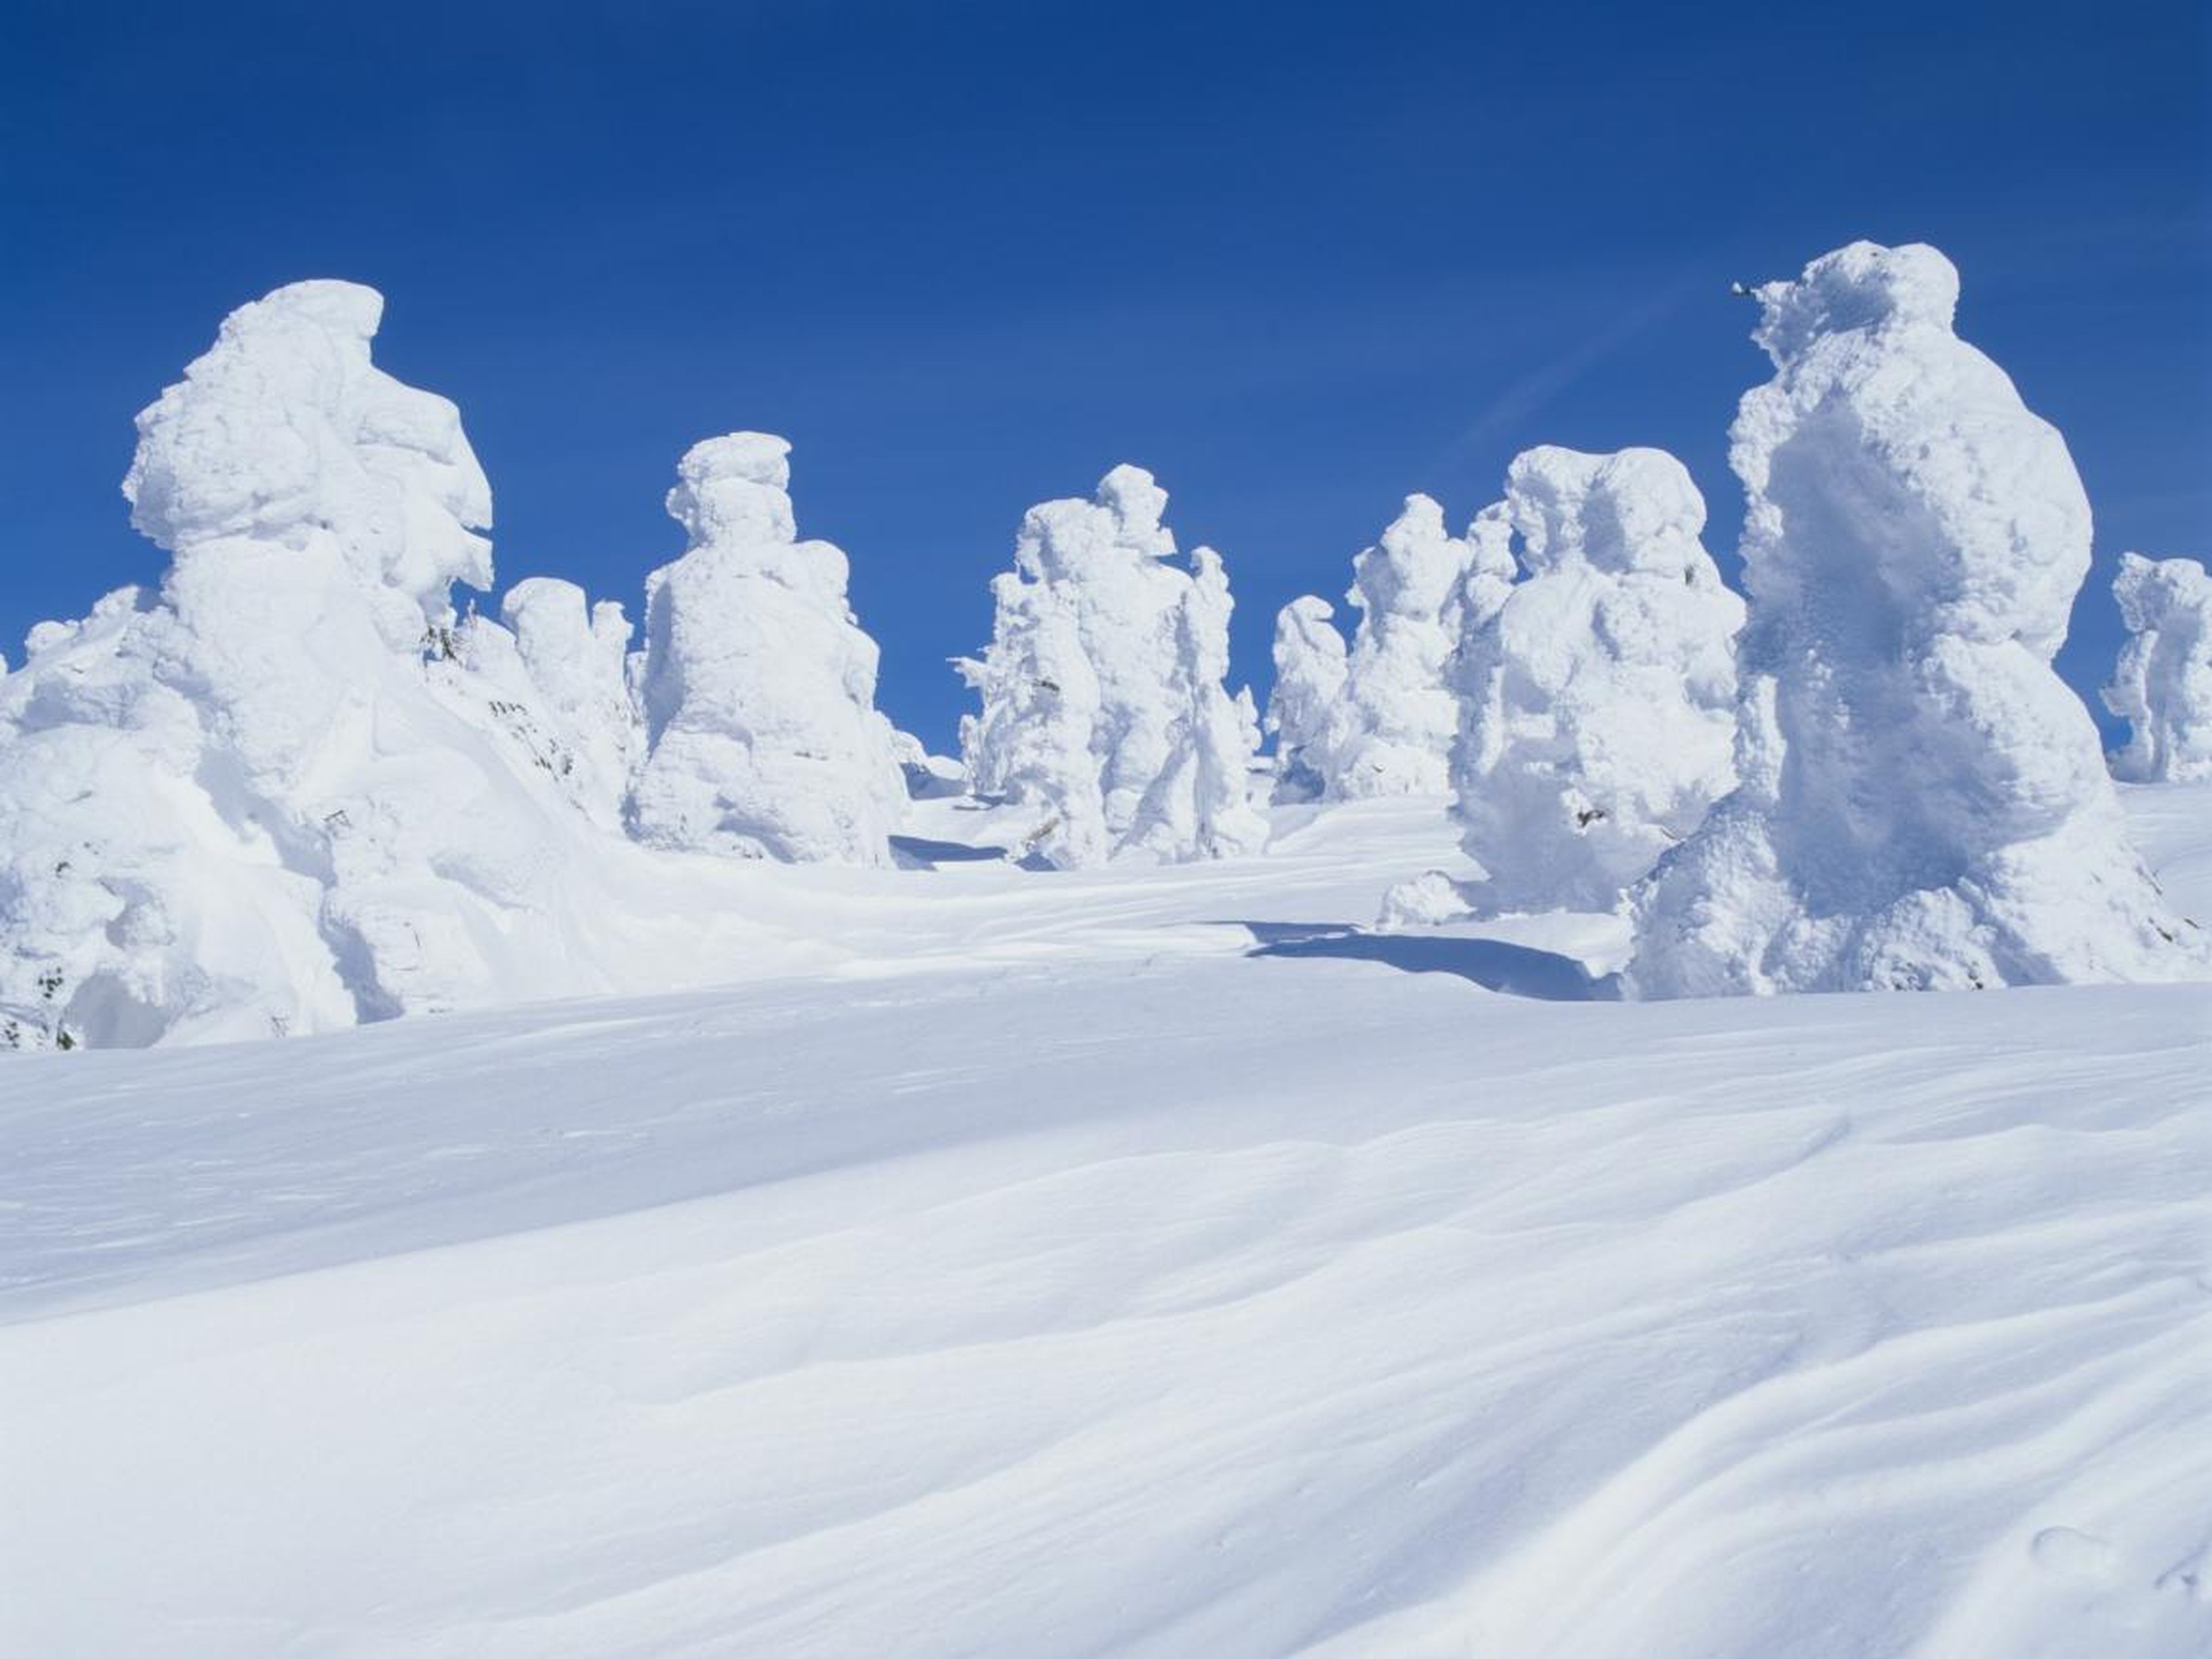 Visitors can take a cable car up the mountain and either ski or snowboard down, or take a walking tour through the giant, white, monster-looking snow-mounds.